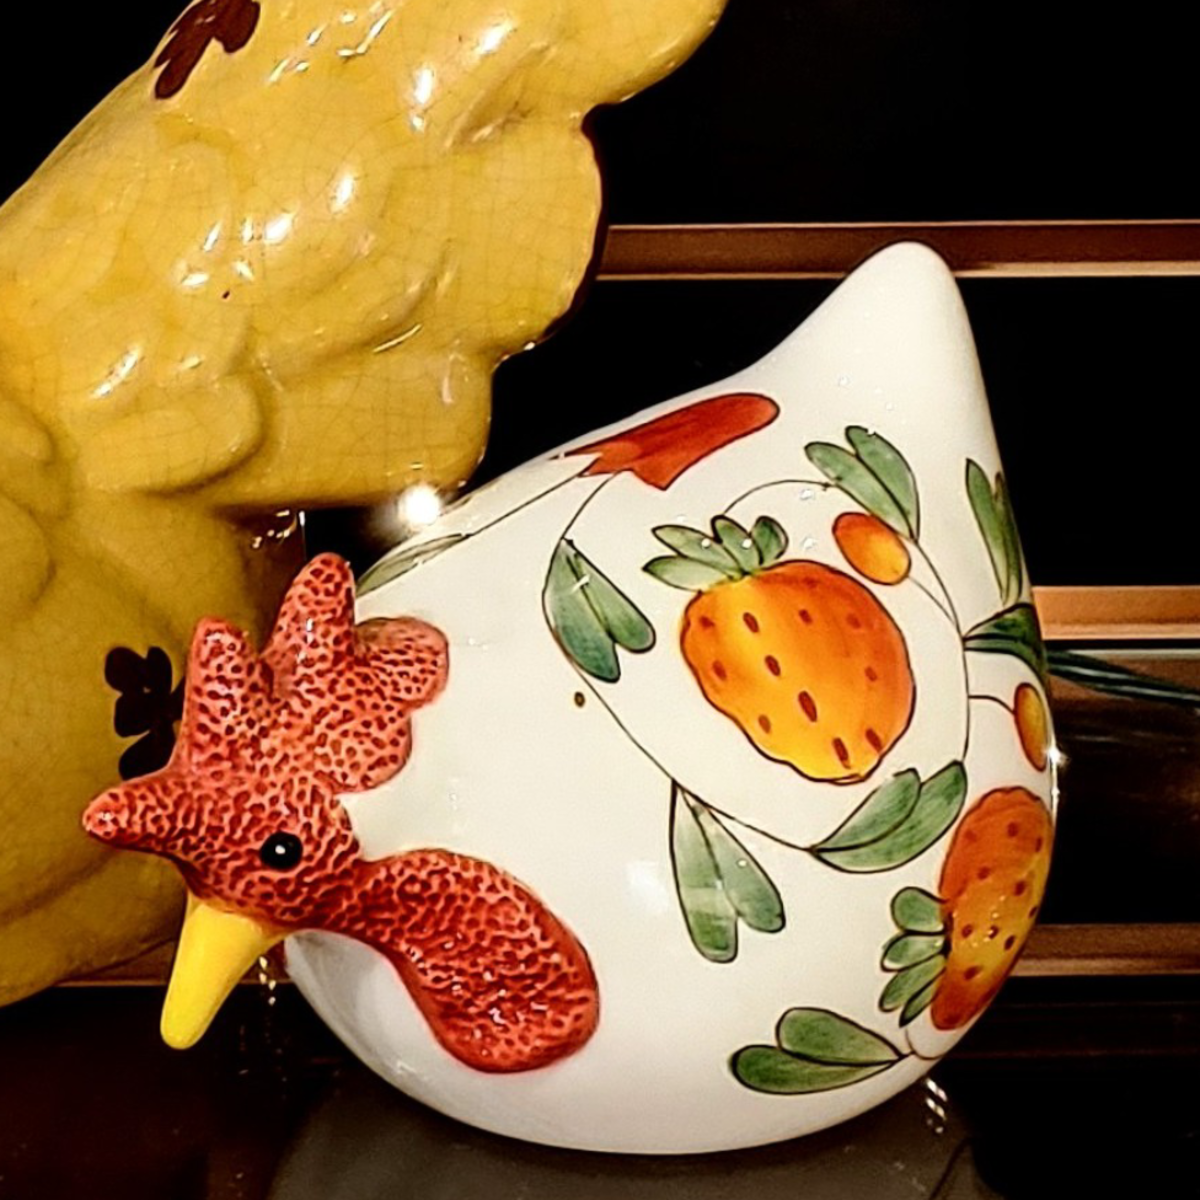 The Sweet Rooster: A Ceramic Figurine That Brings Back Childhood Memories